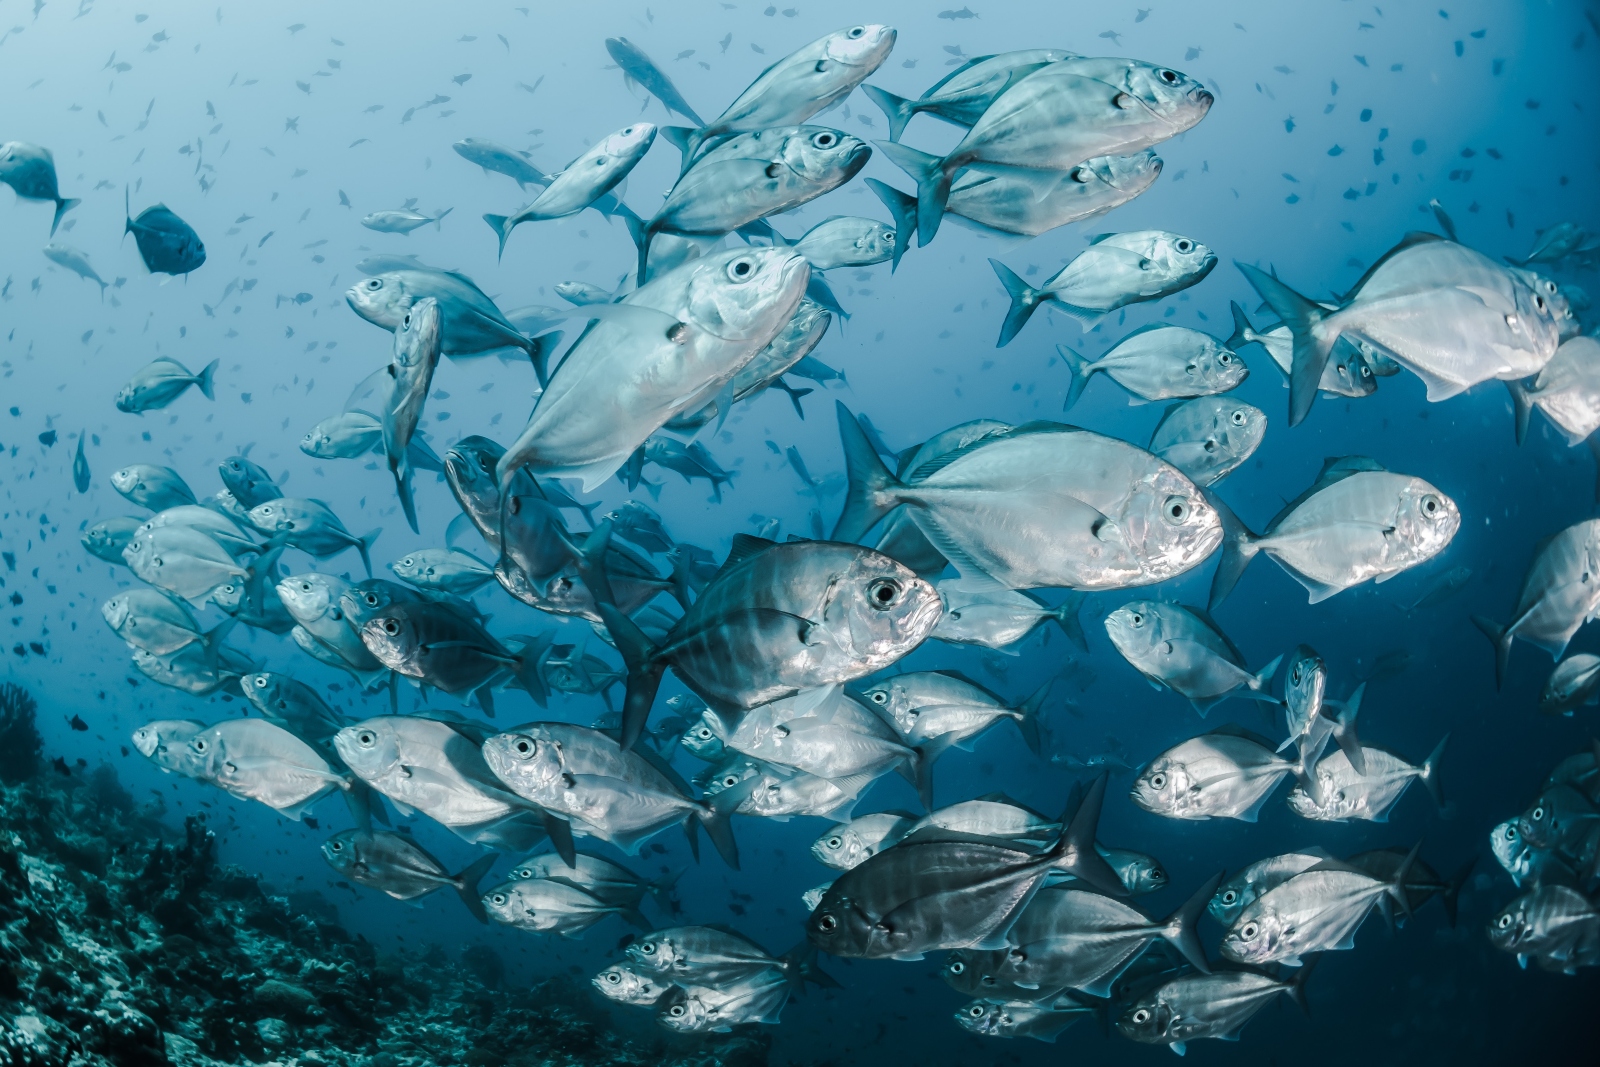 A school of silvery fish swims in clear blue water.